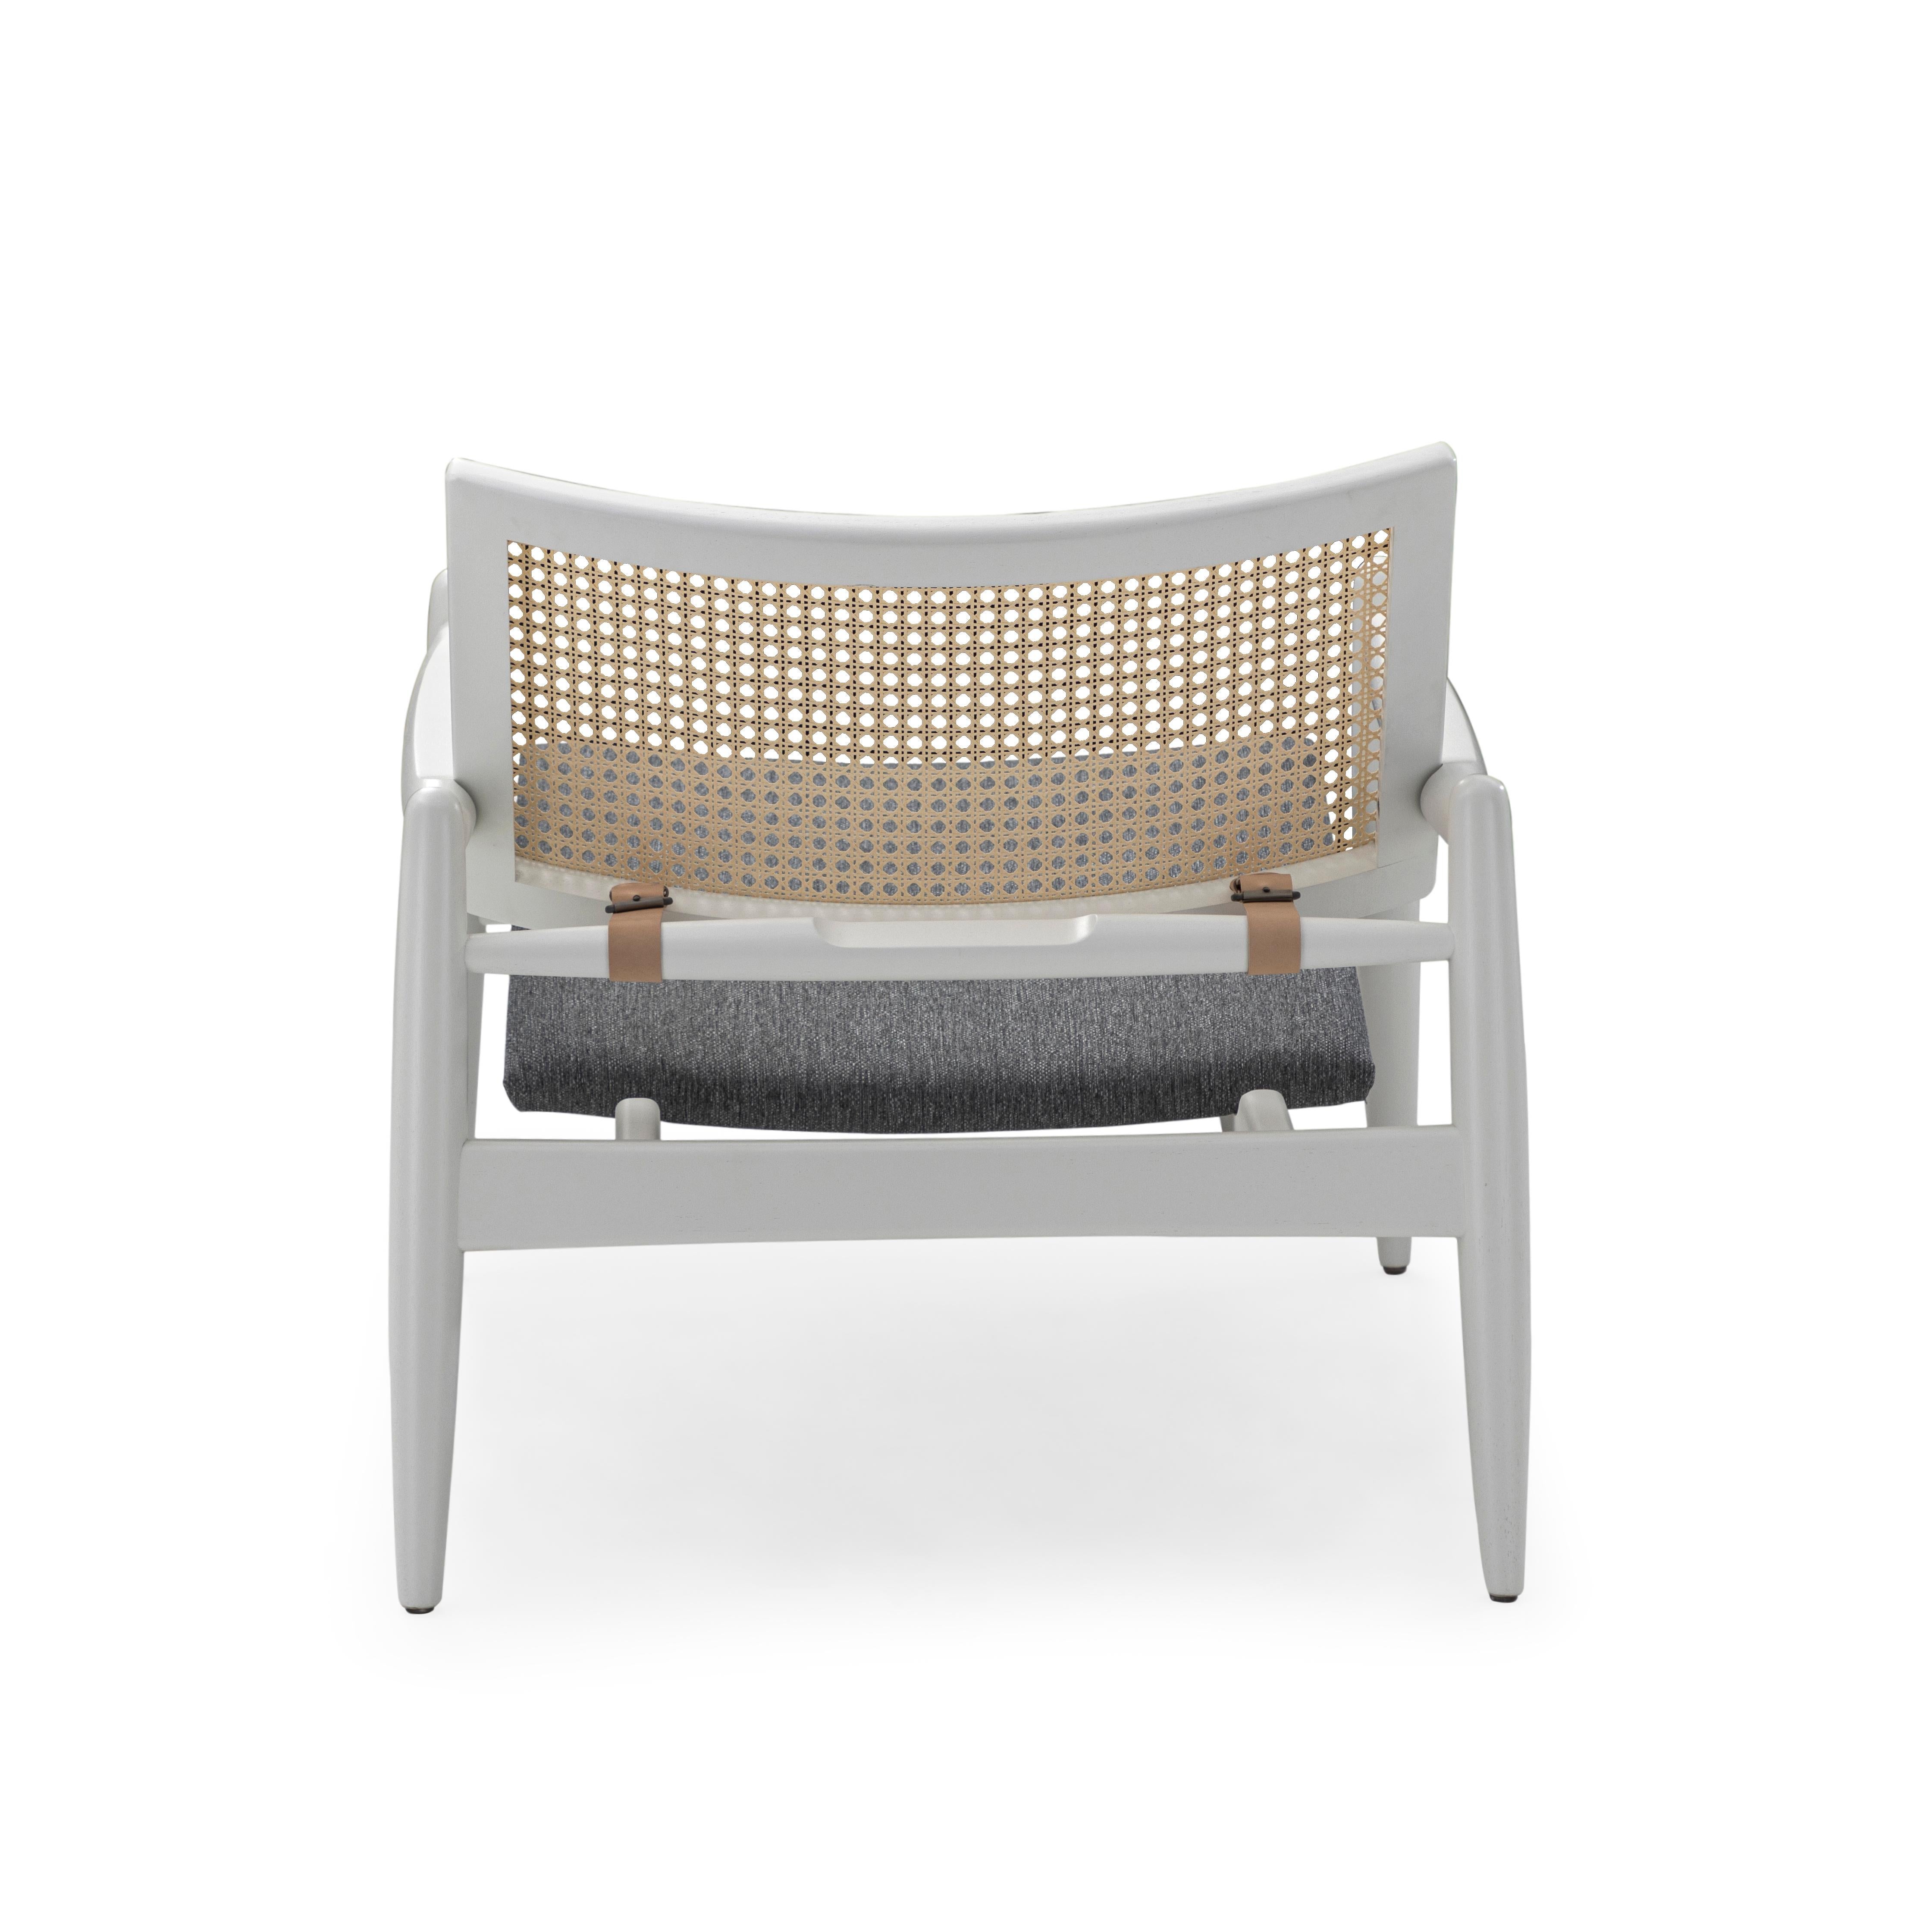 Soho Curved Cane-Back Chair in White Wood Finish In New Condition For Sale In Miami, FL